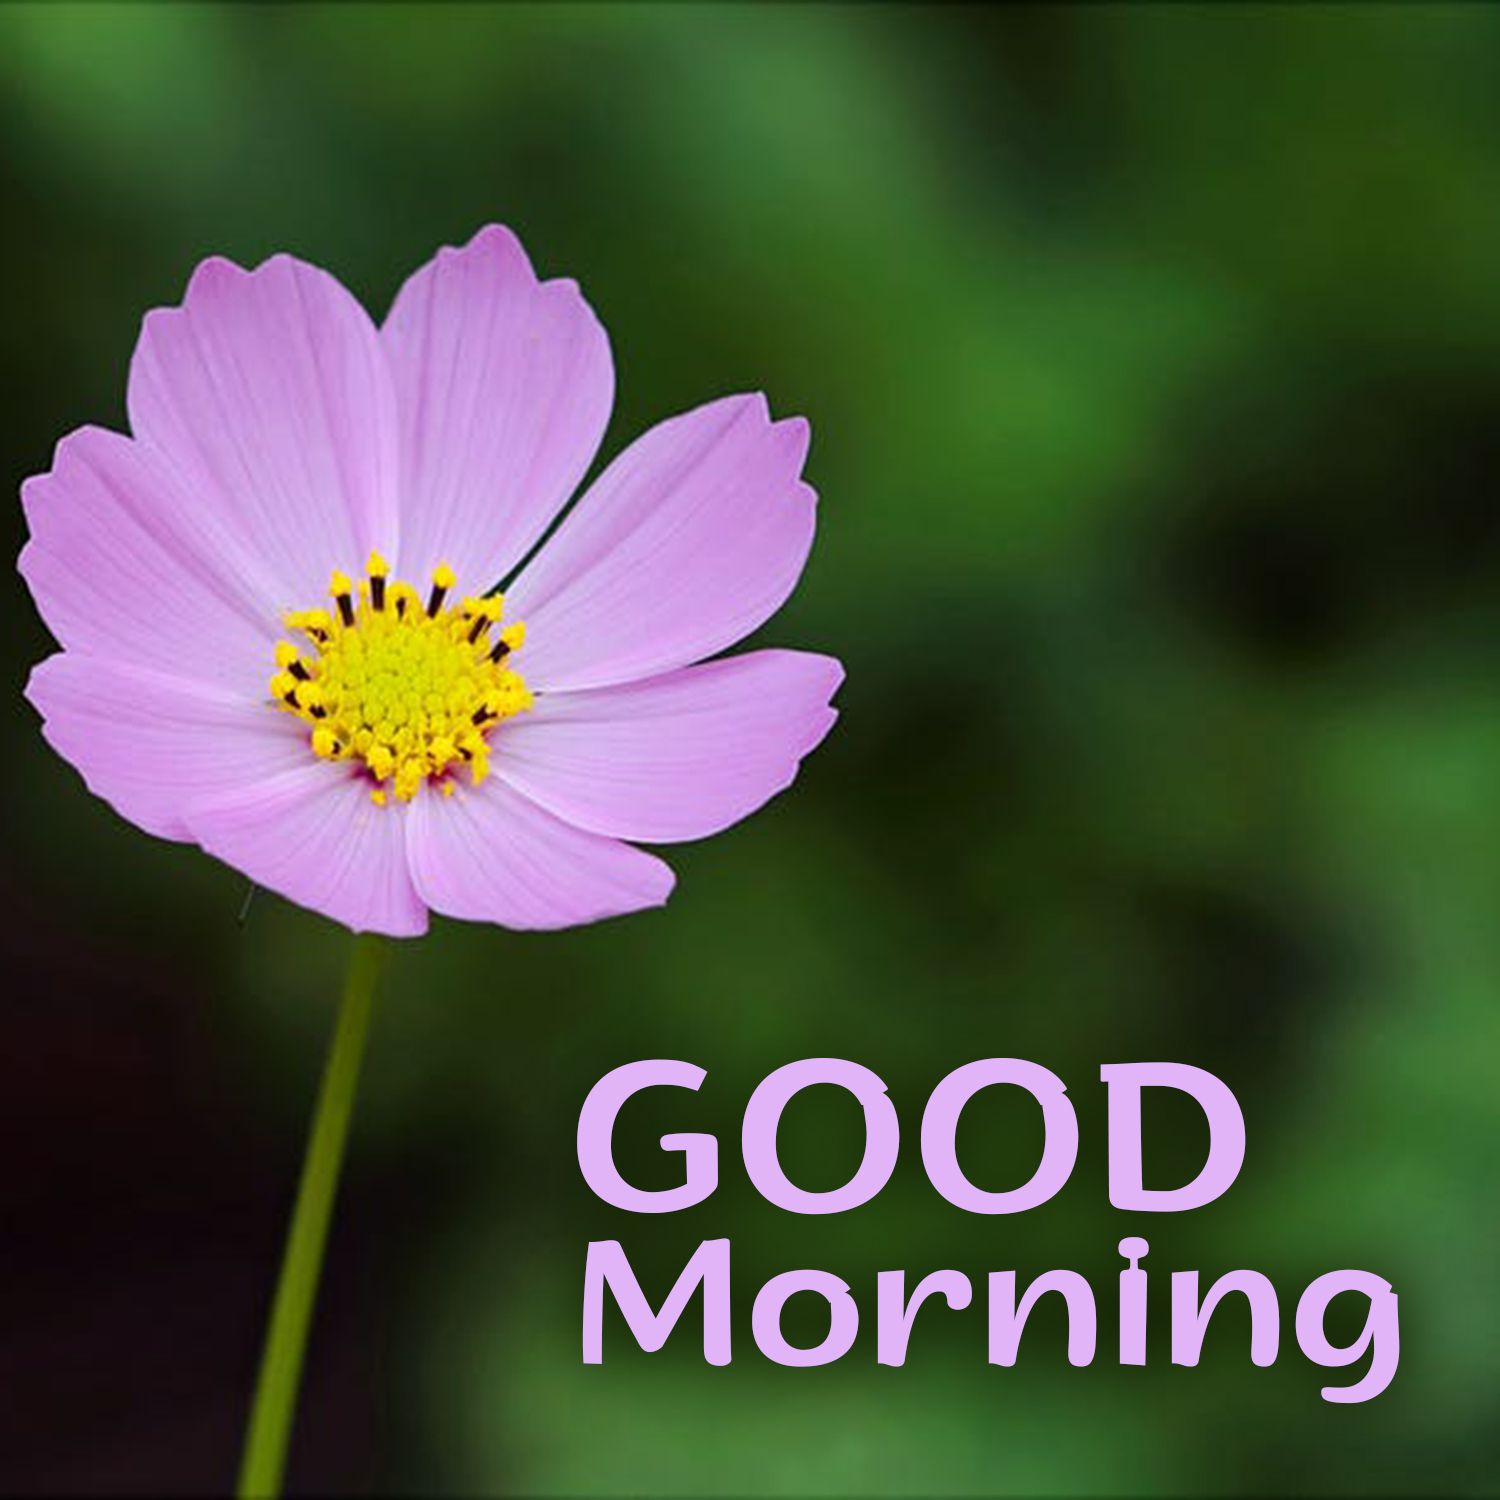 Good Morning Flowers With Messages